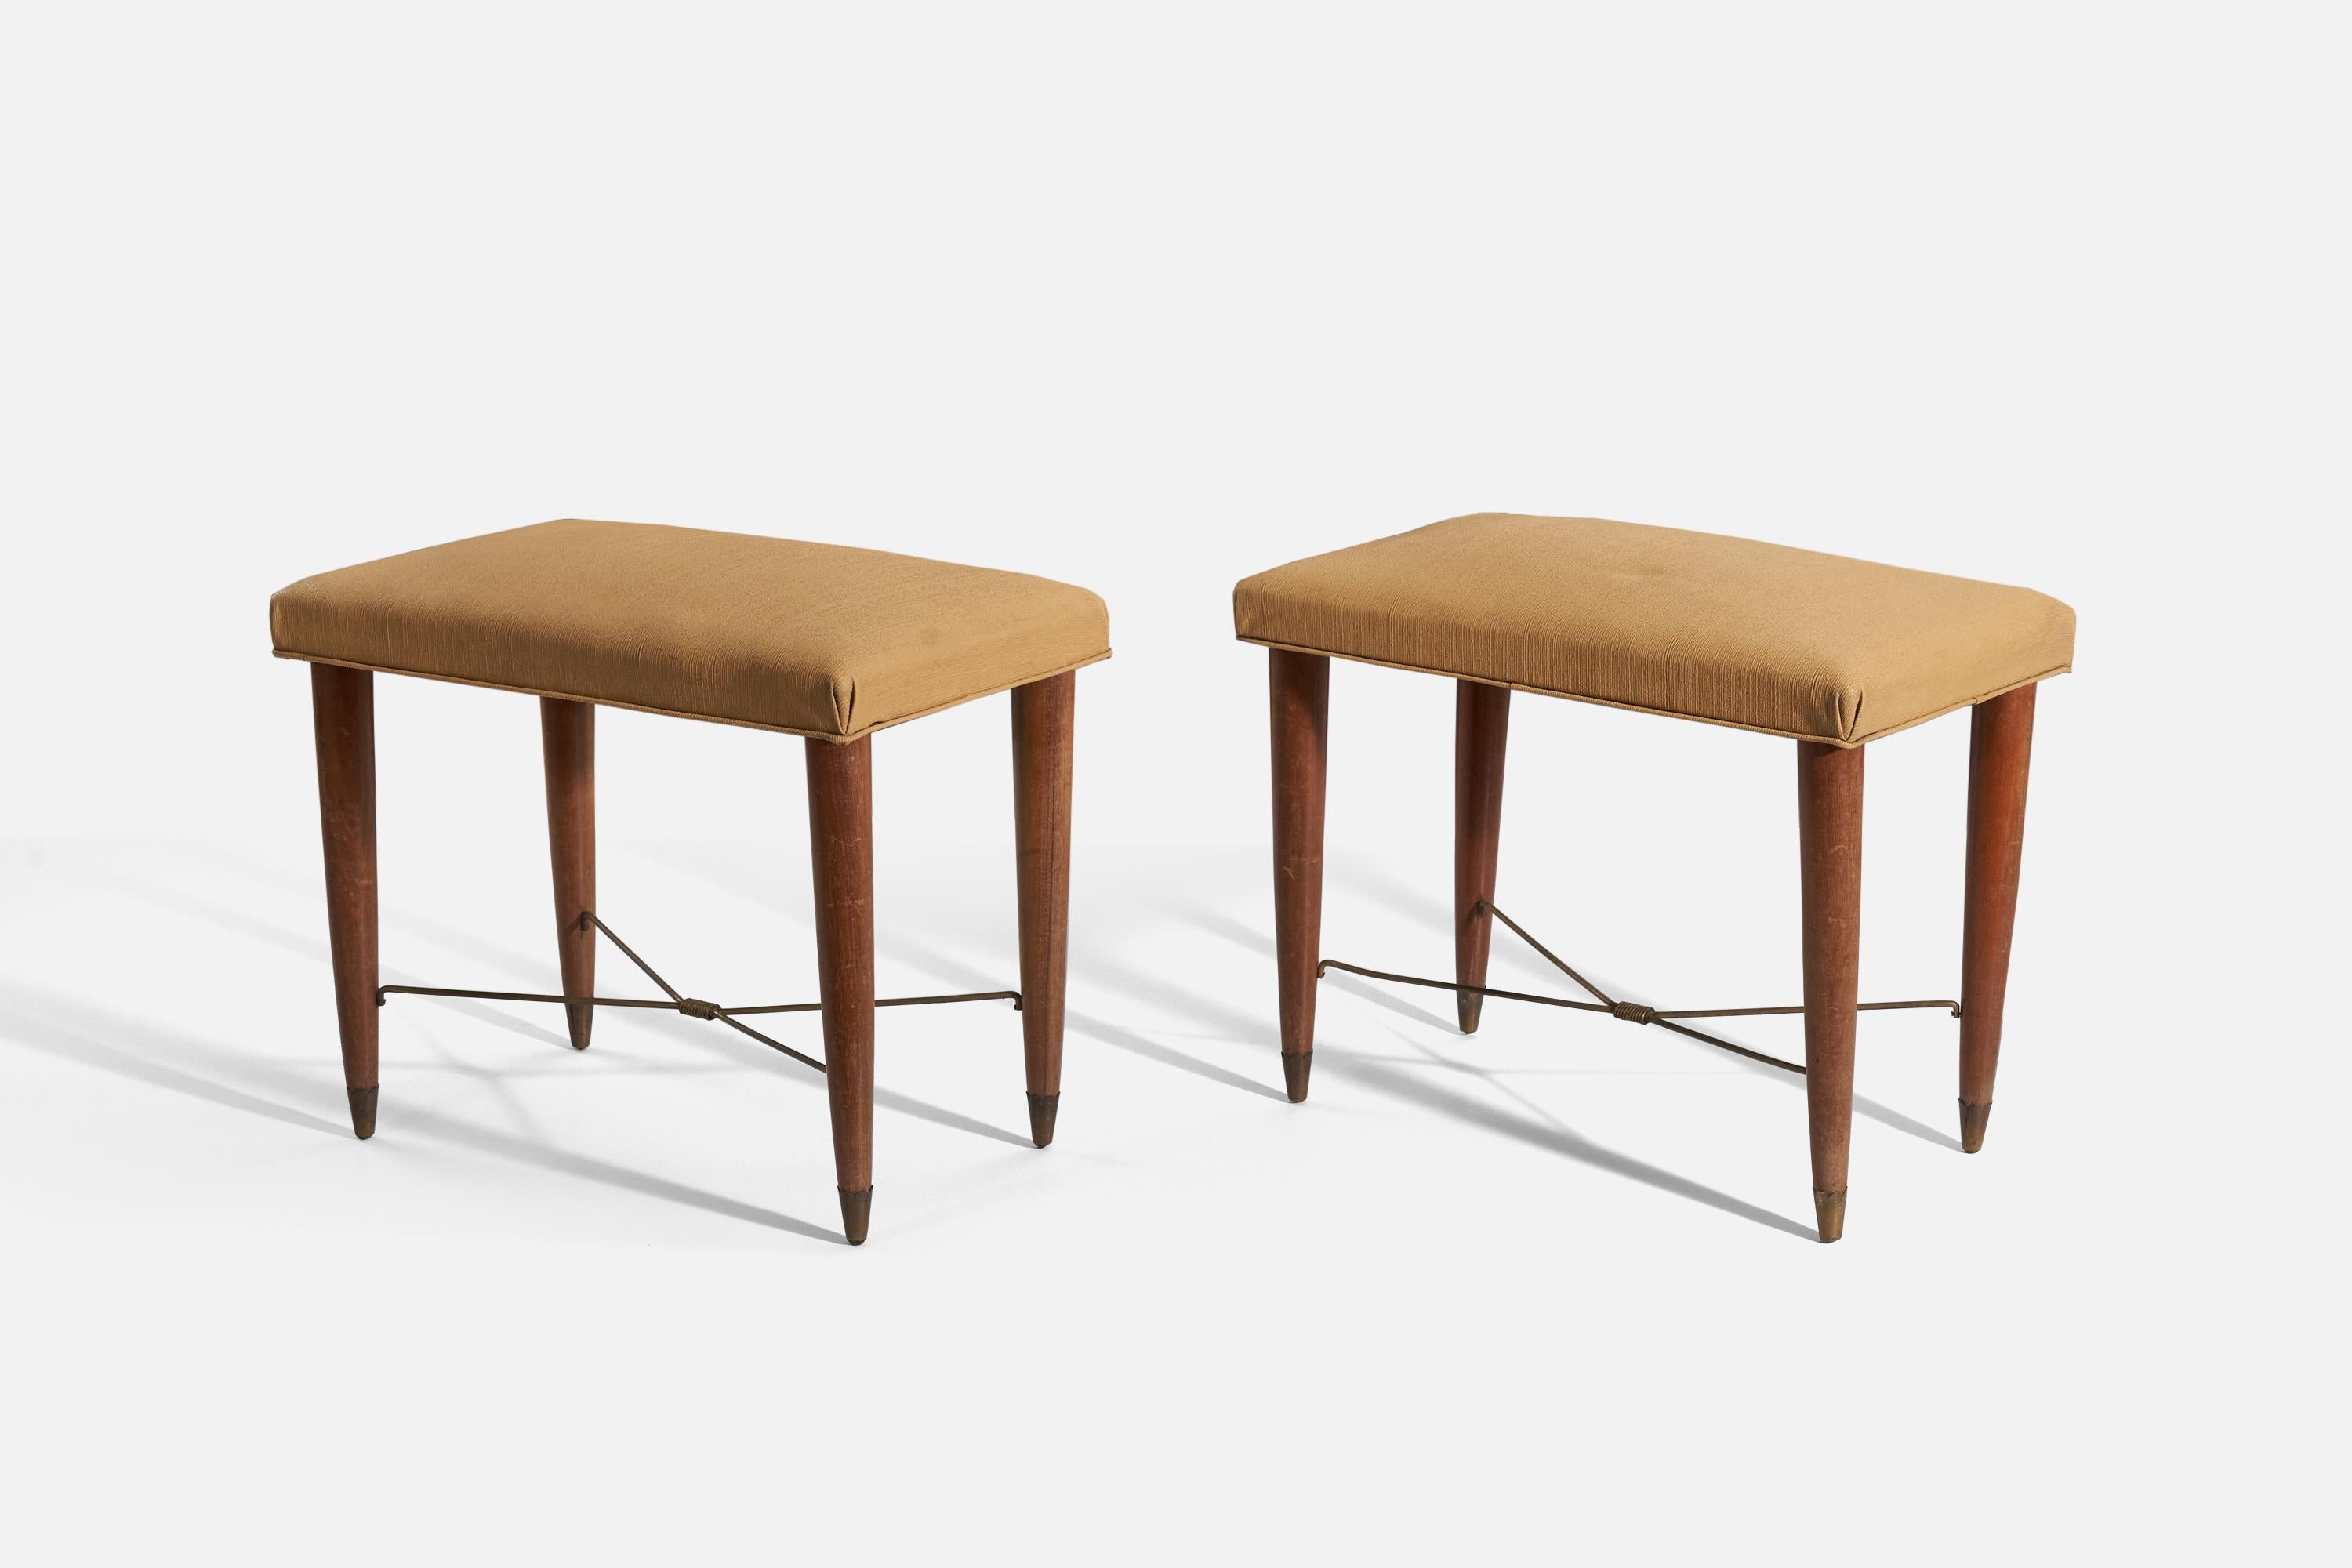 A pair of walnut, brass and yellow fabric stools, designed and produced in Italy, 1940s.

